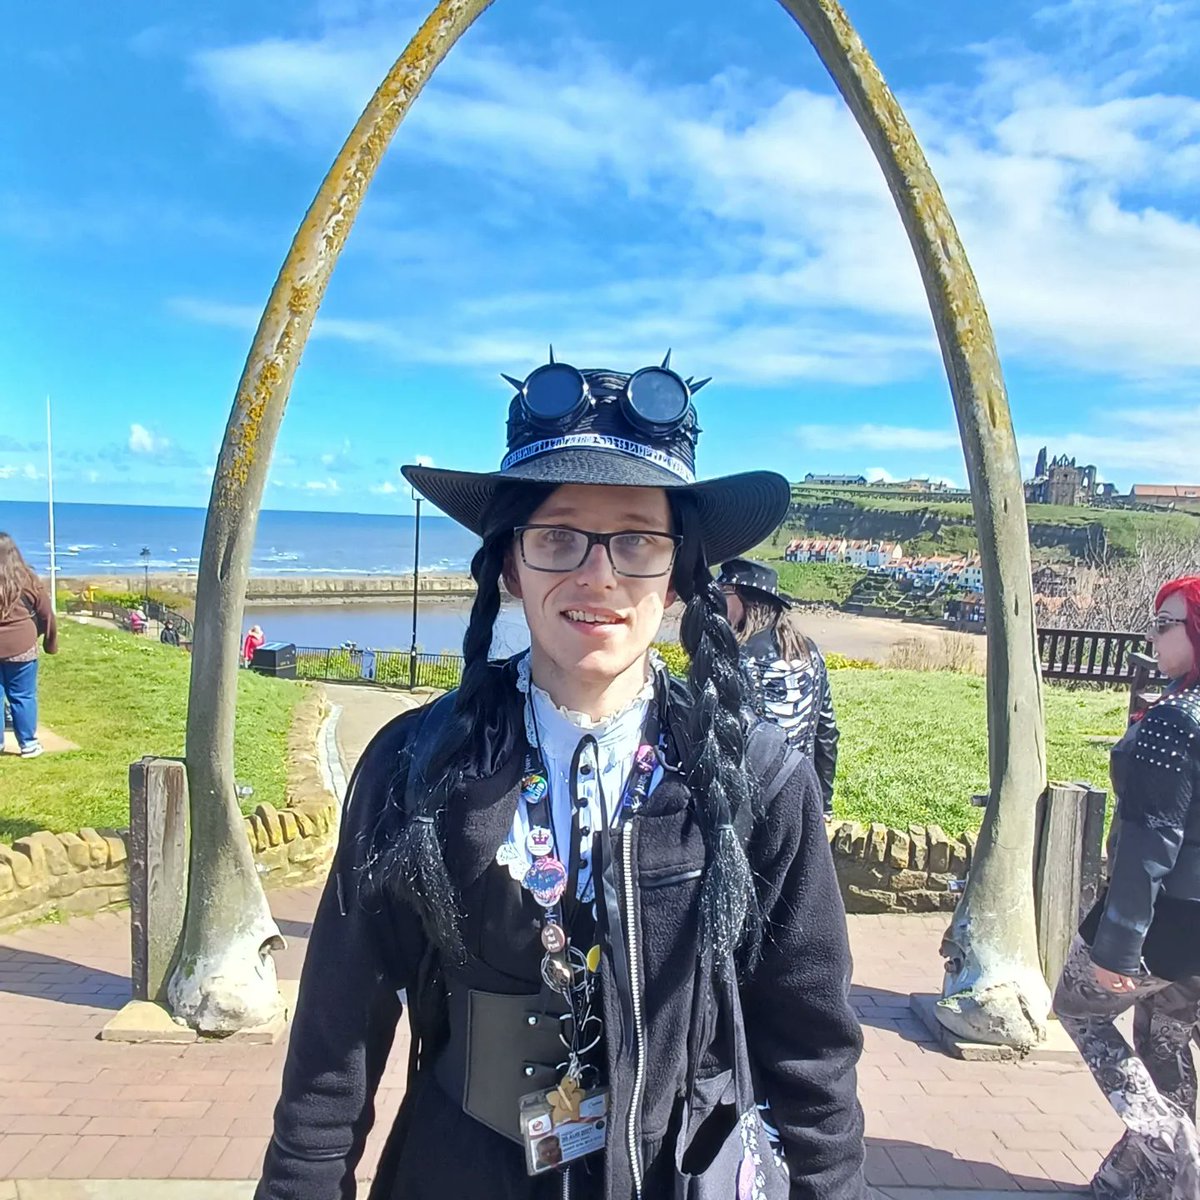 I was at whitby goth weekend on Friday at my First one I have a lot of photos and videos.  

But just to say I need to go back only on Fridays thank goodness I only I don't live too far from Whitby. 
#whitbyGothWeekend